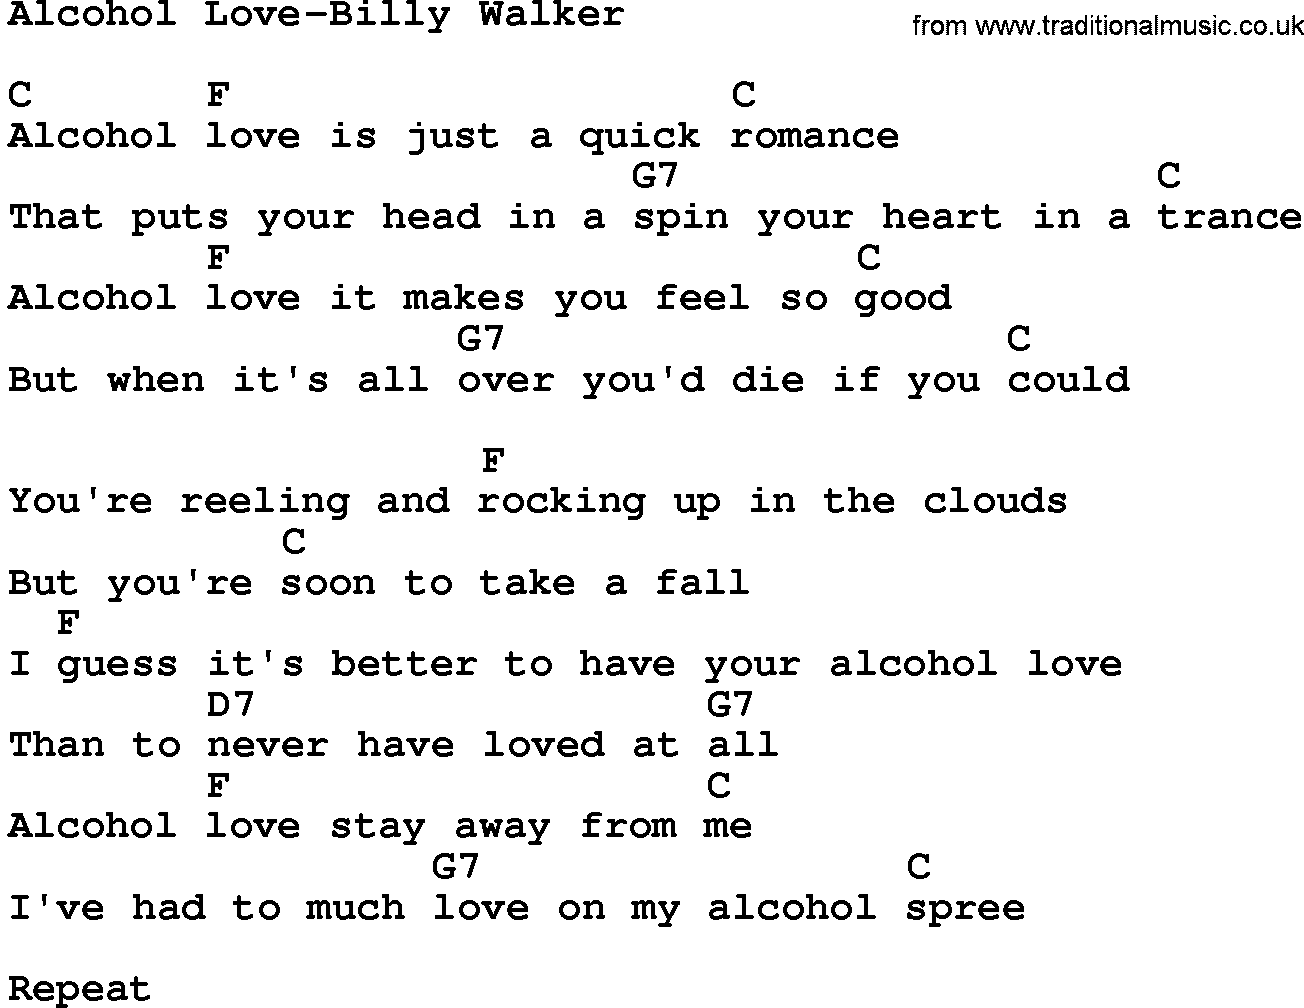 Country music song: Alcohol Love-Billy Walker lyrics and chords